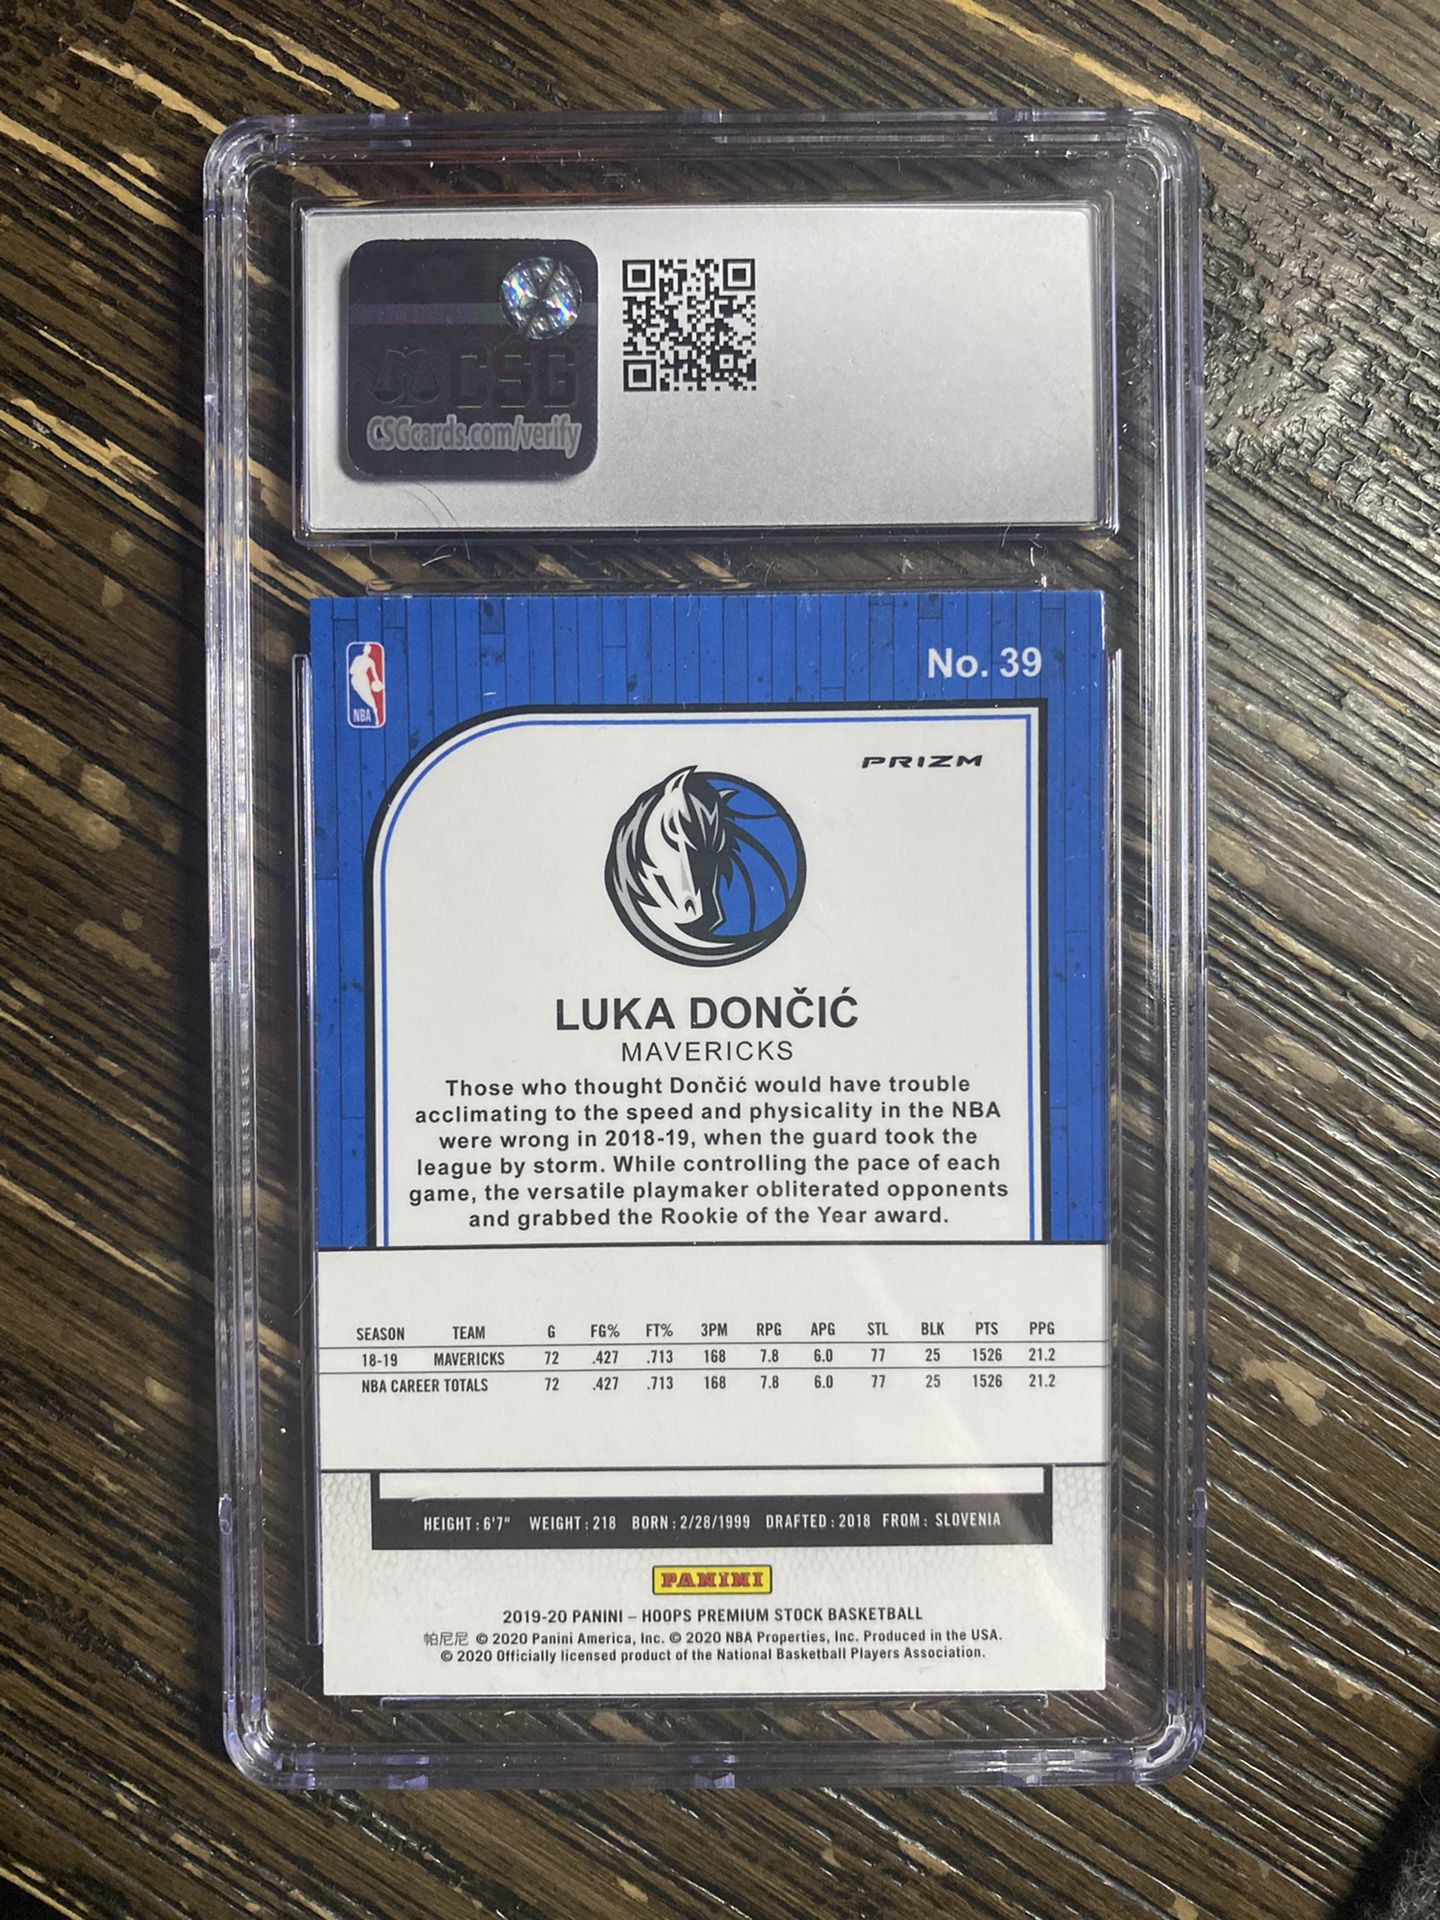 2018 Panini Prizm Luka Doncic Lot Of 2 for Sale in Valley Center, KS -  OfferUp